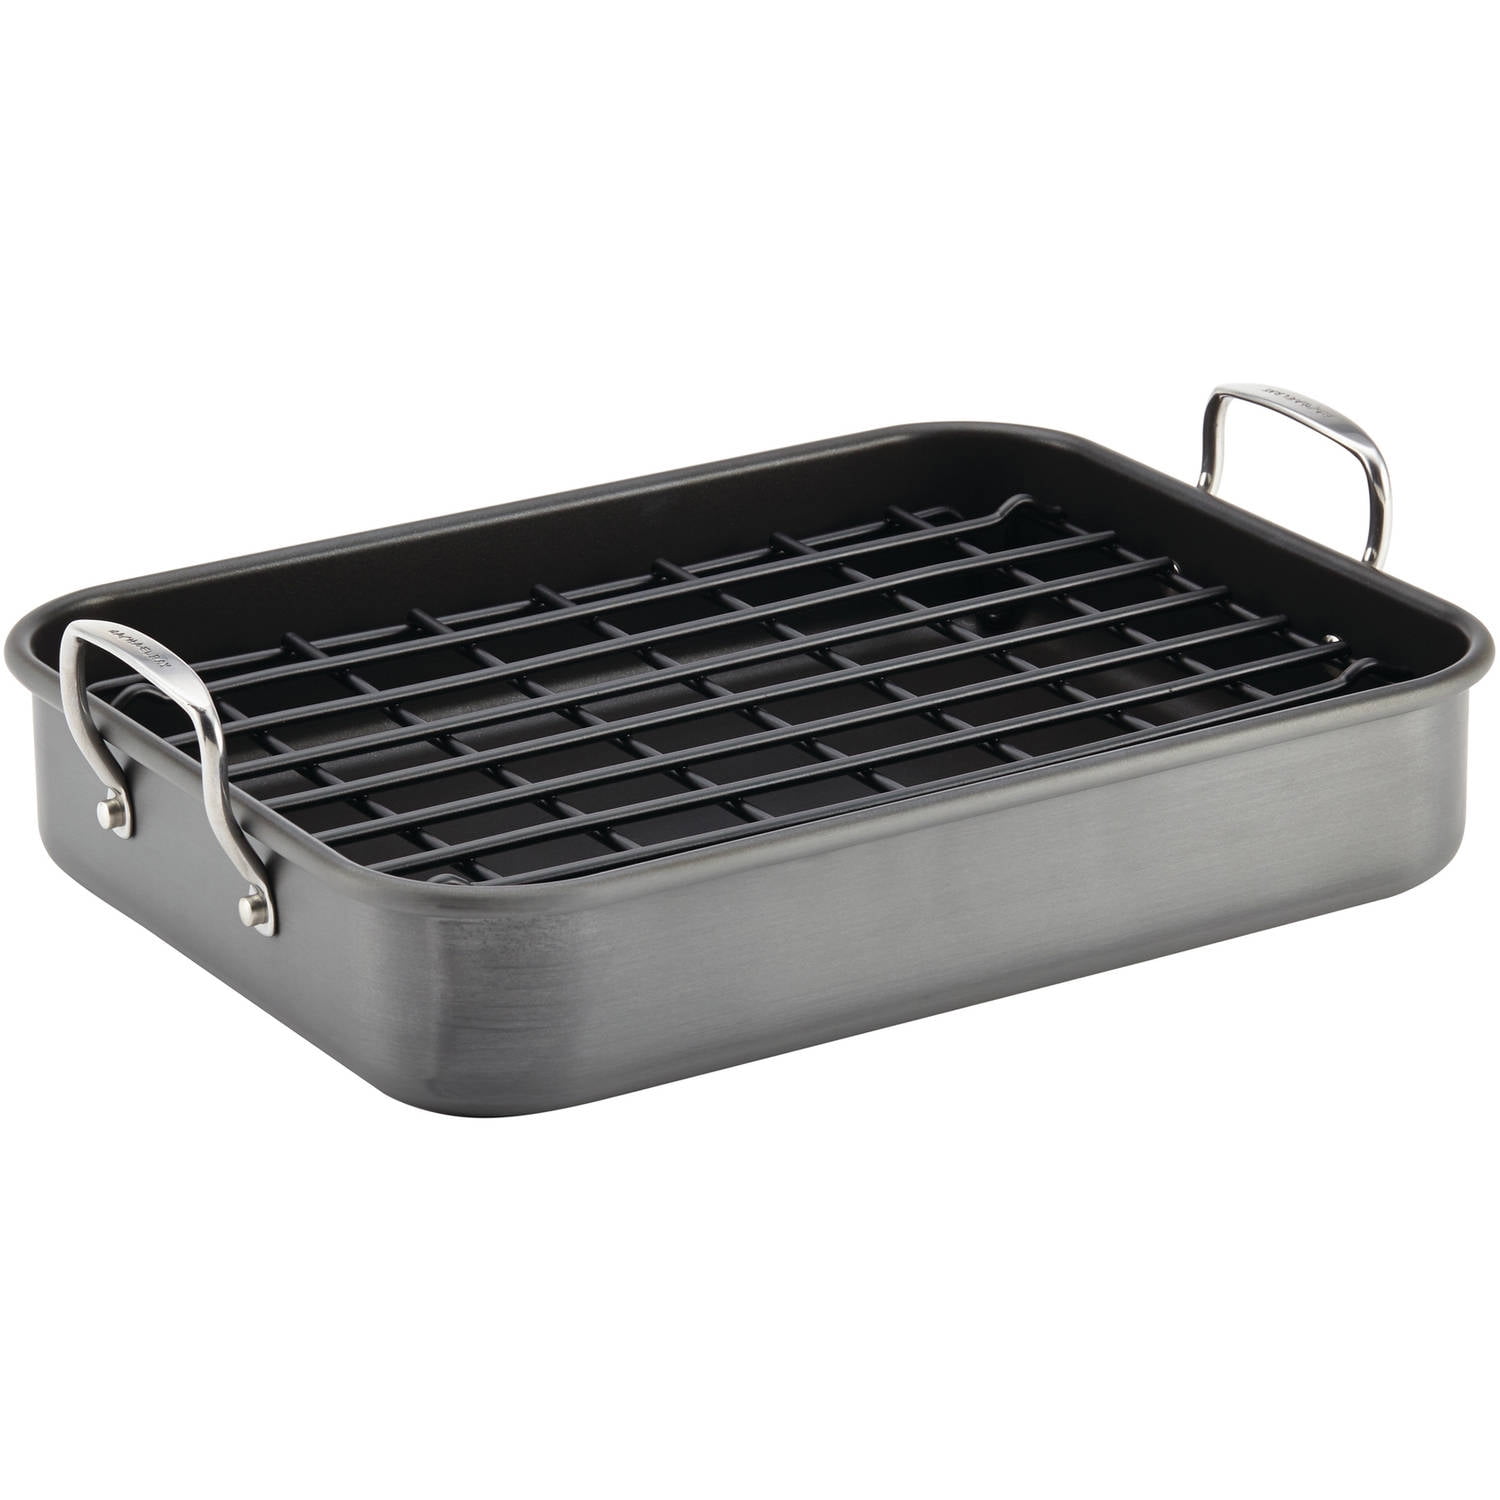 HA1 Hard Anodized Nonstick Cookware, Roaster with Rack, 13 x 16